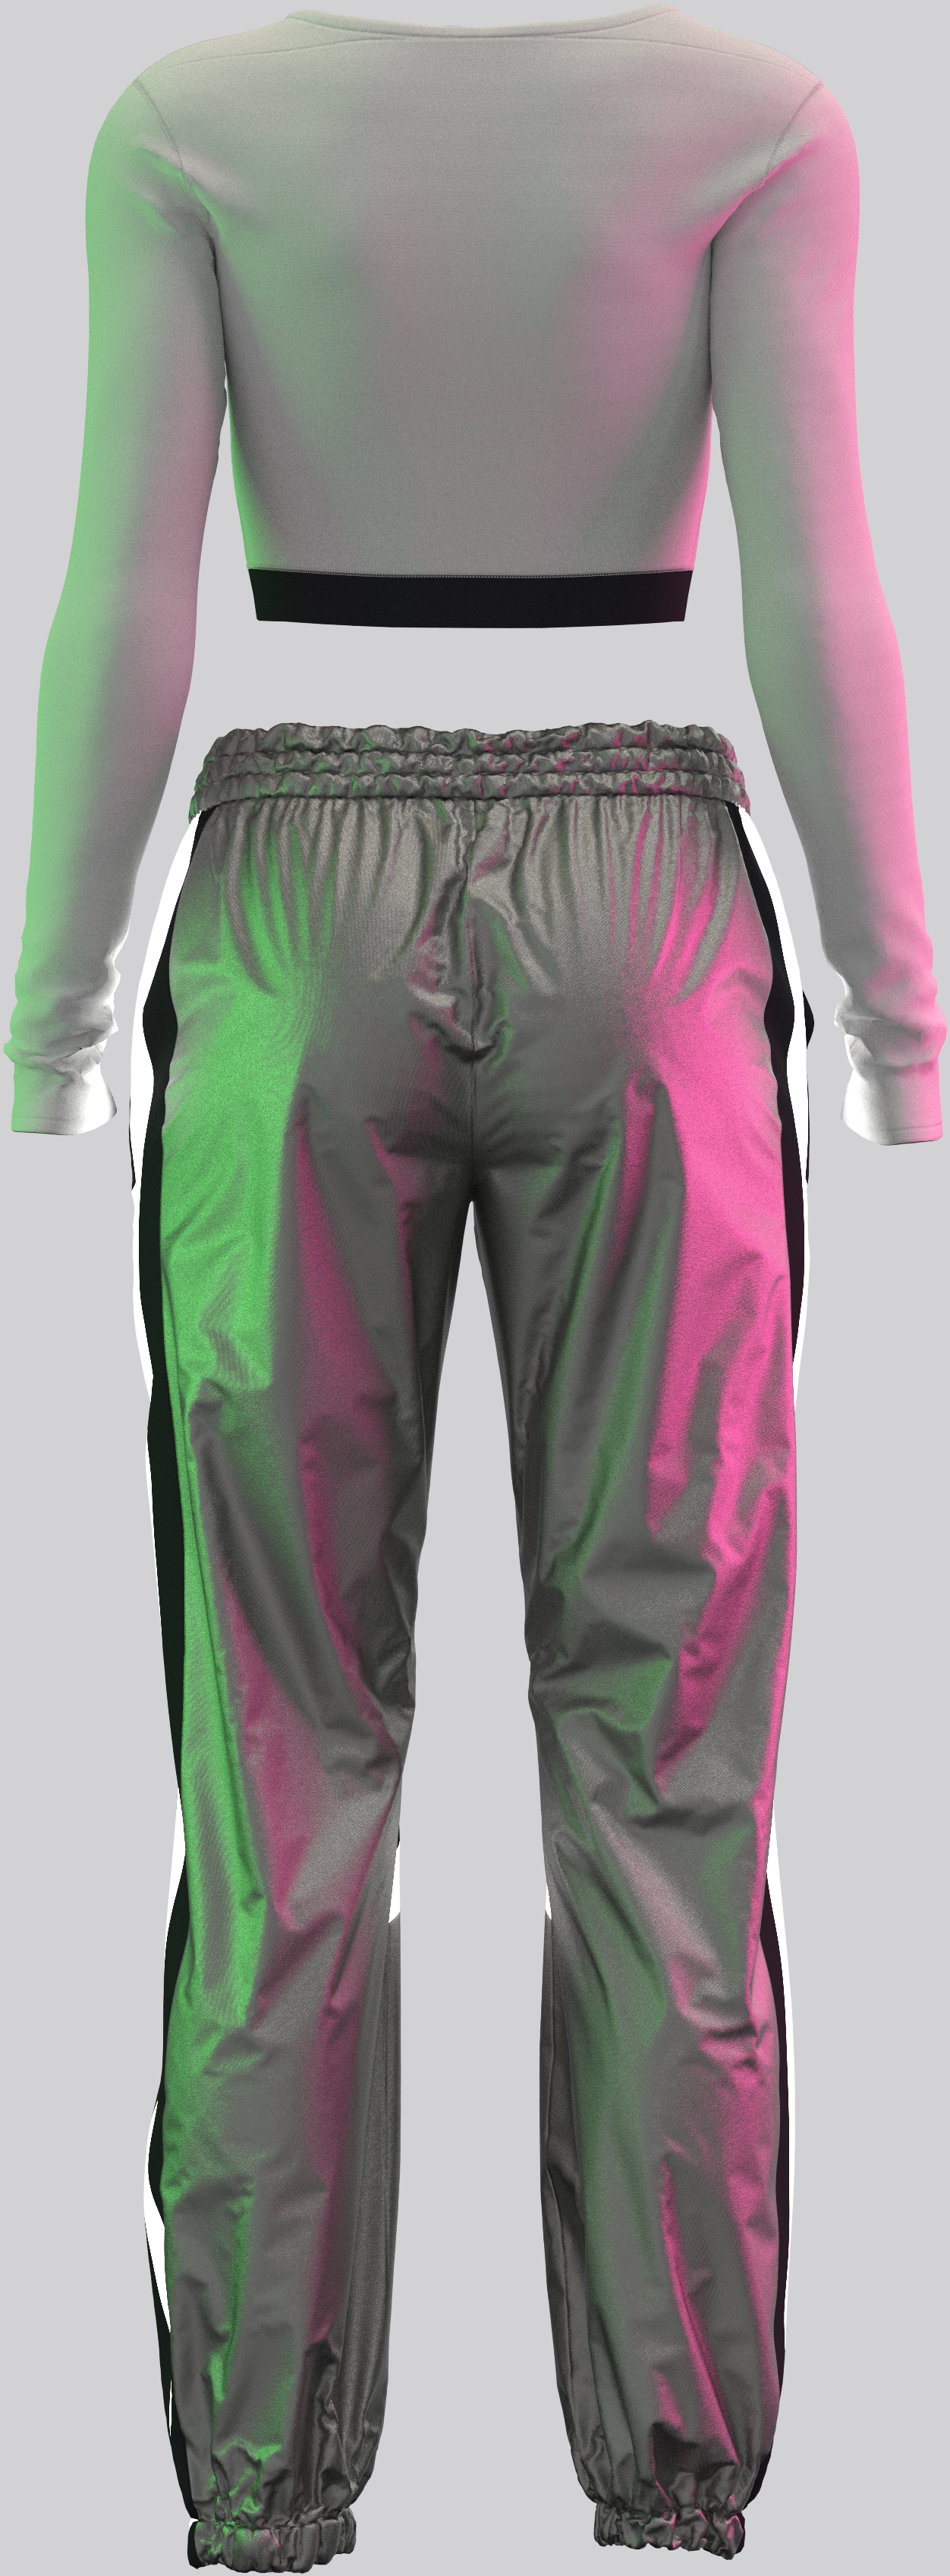 Reflective_Jogger_and_Crop_Top_Closet_Library_Fabric__Colorway_A_2.png